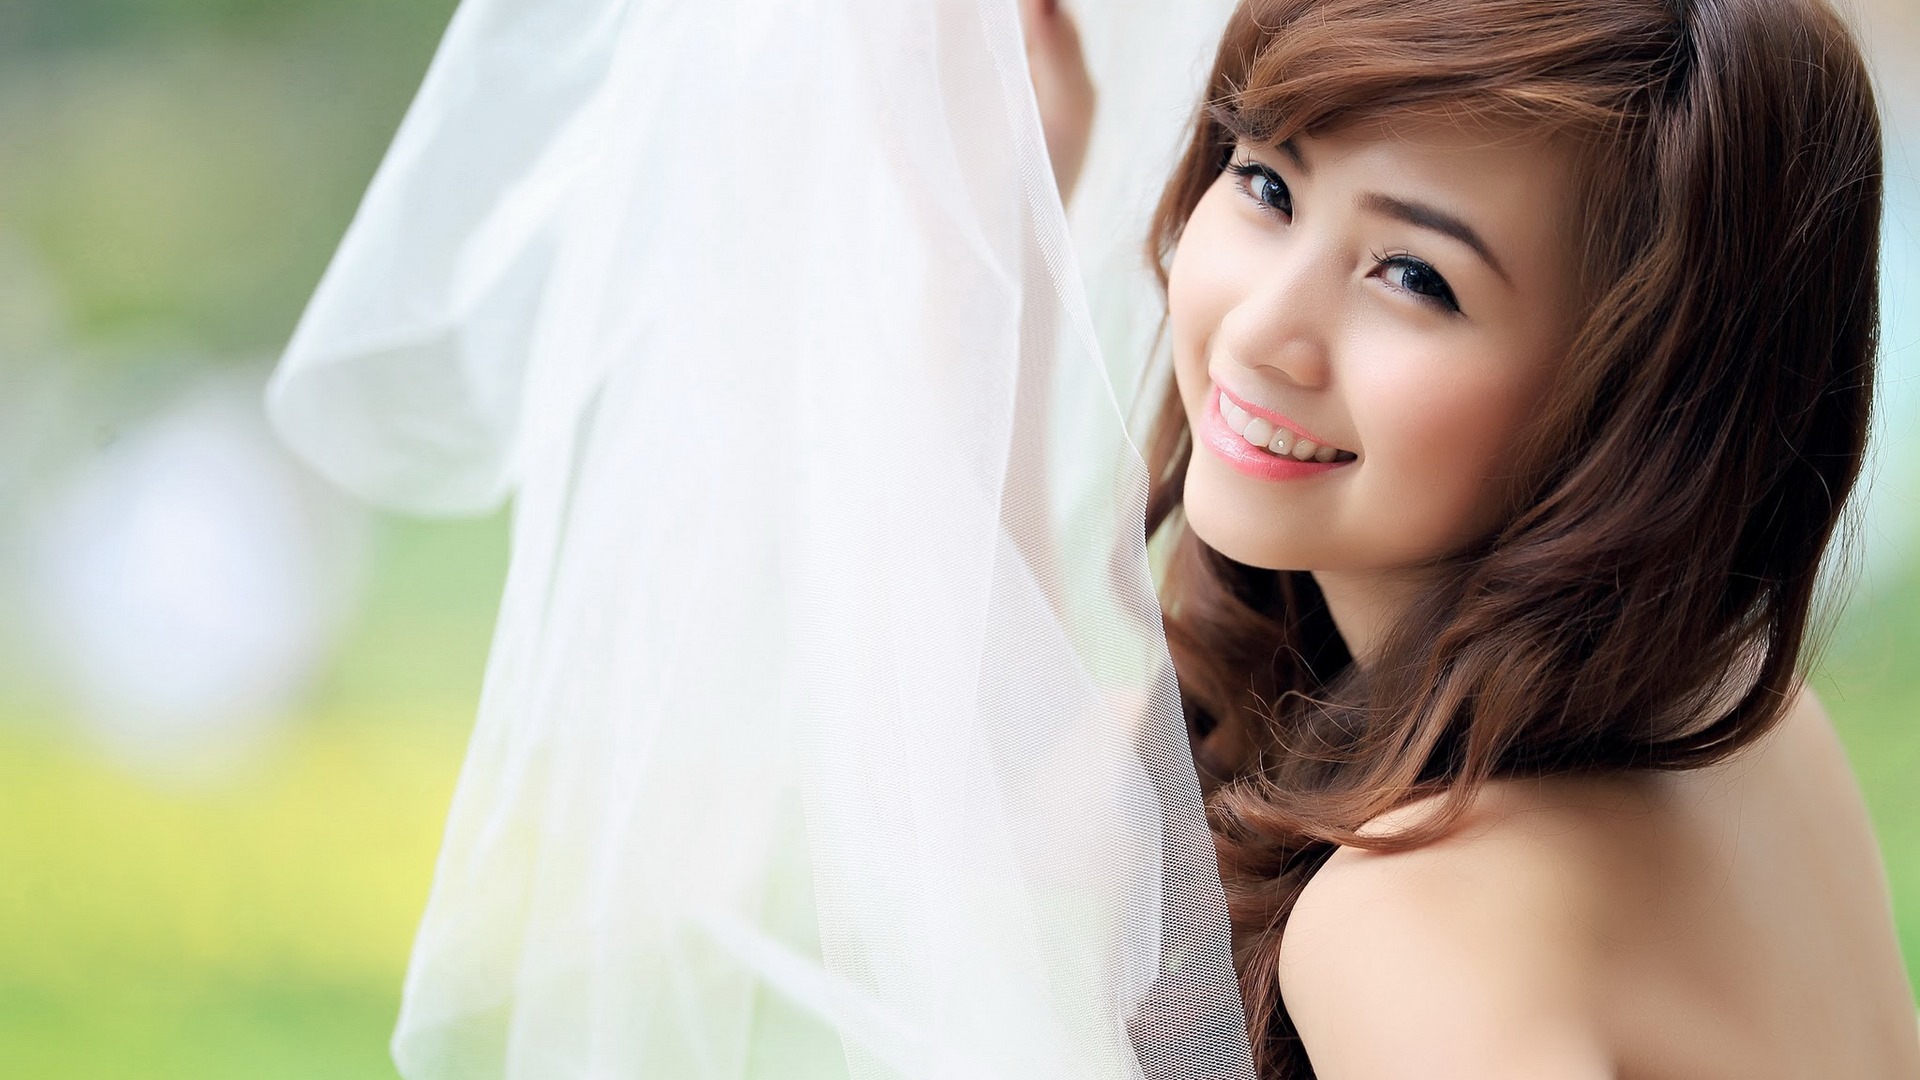 Pure and lovely young Asian girl HD wallpapers collection (4) #23 - 1920x1080